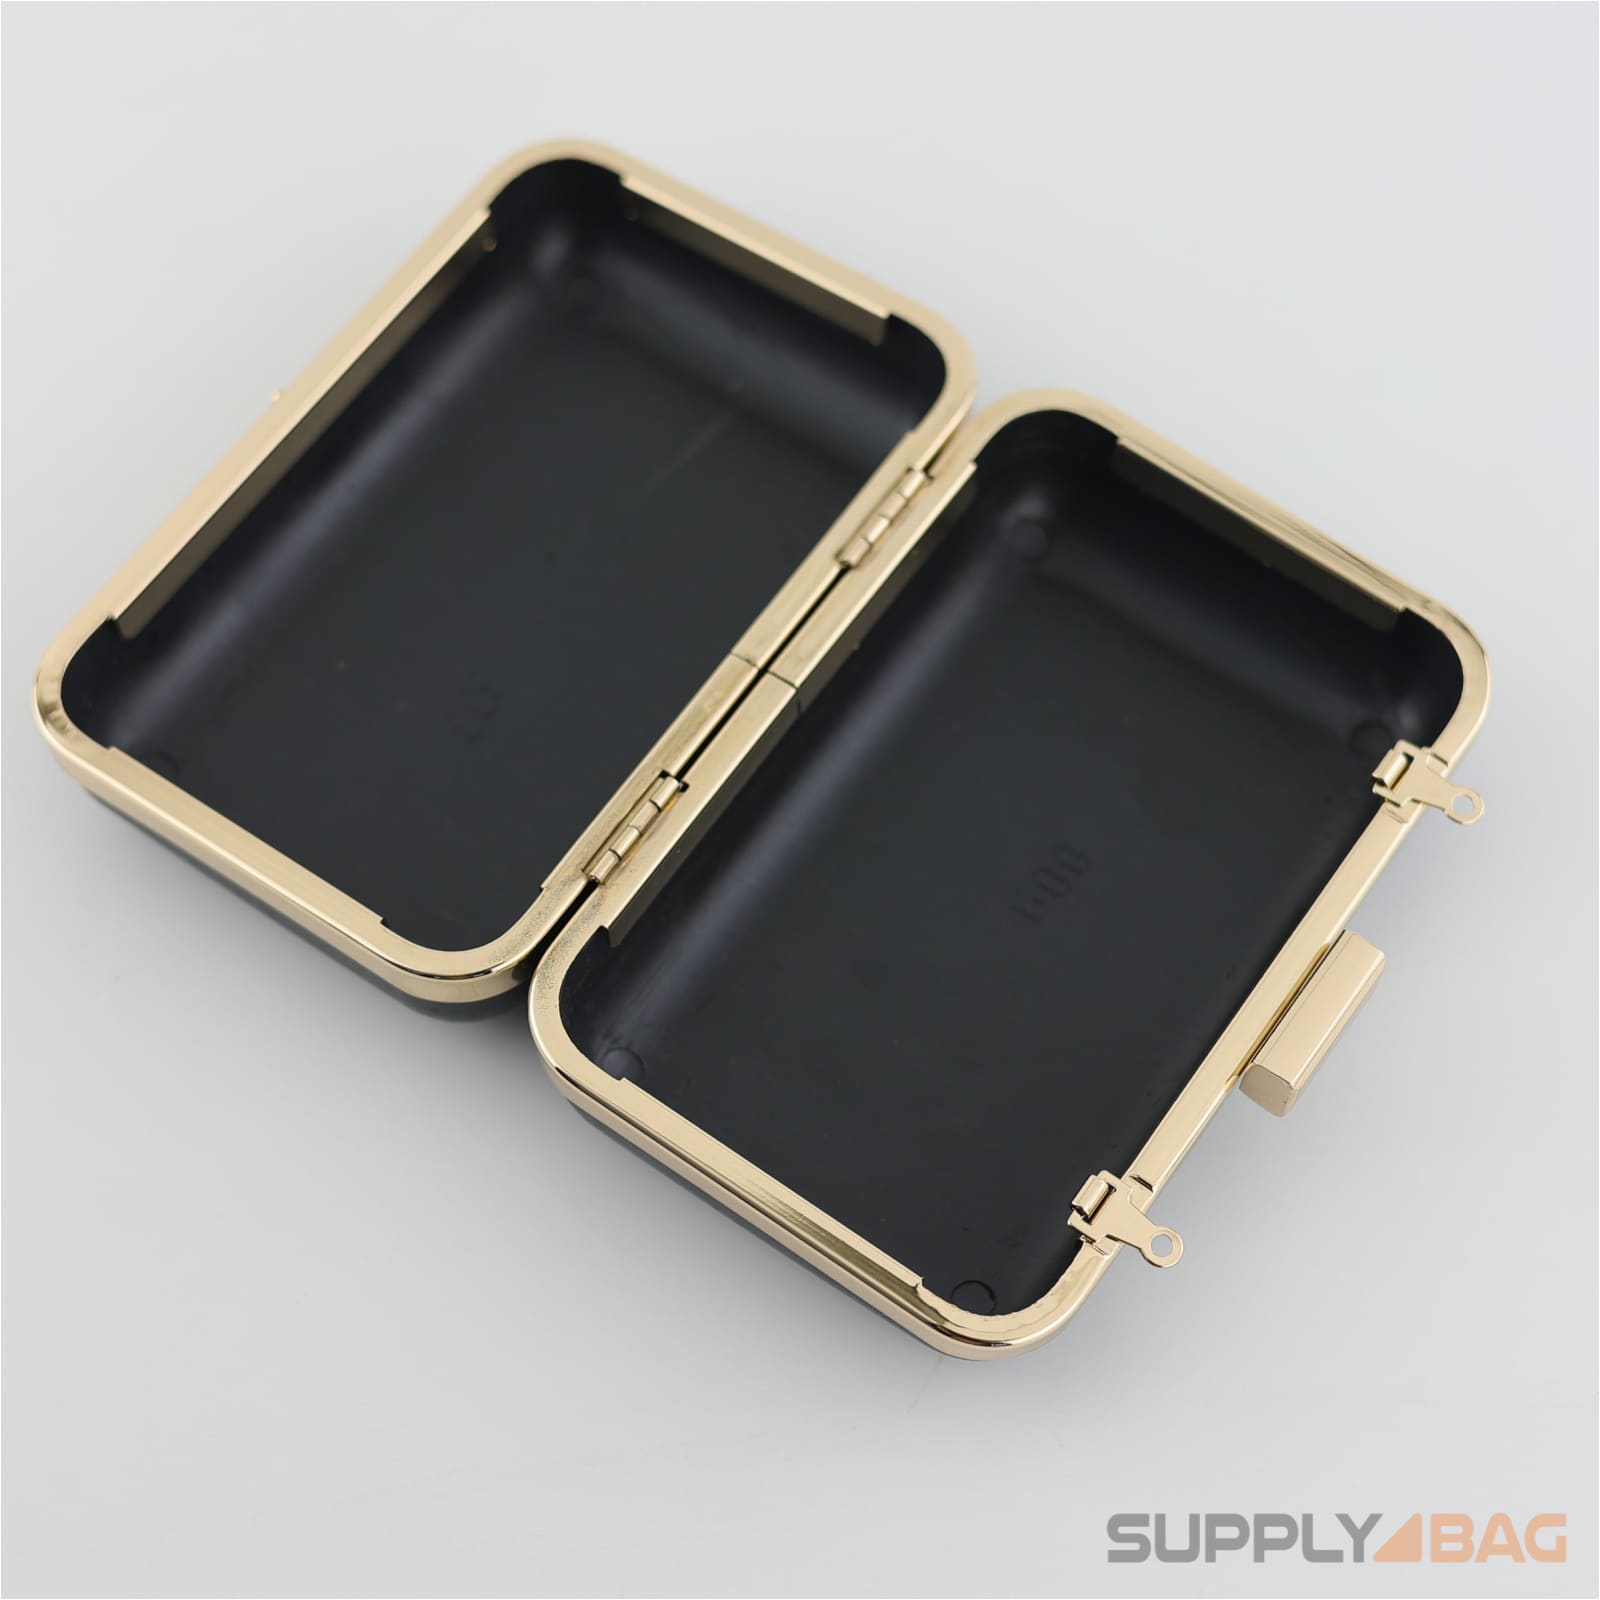 5 3/8 x 3 1/2 inch - gold clamshell clutch frame with covers